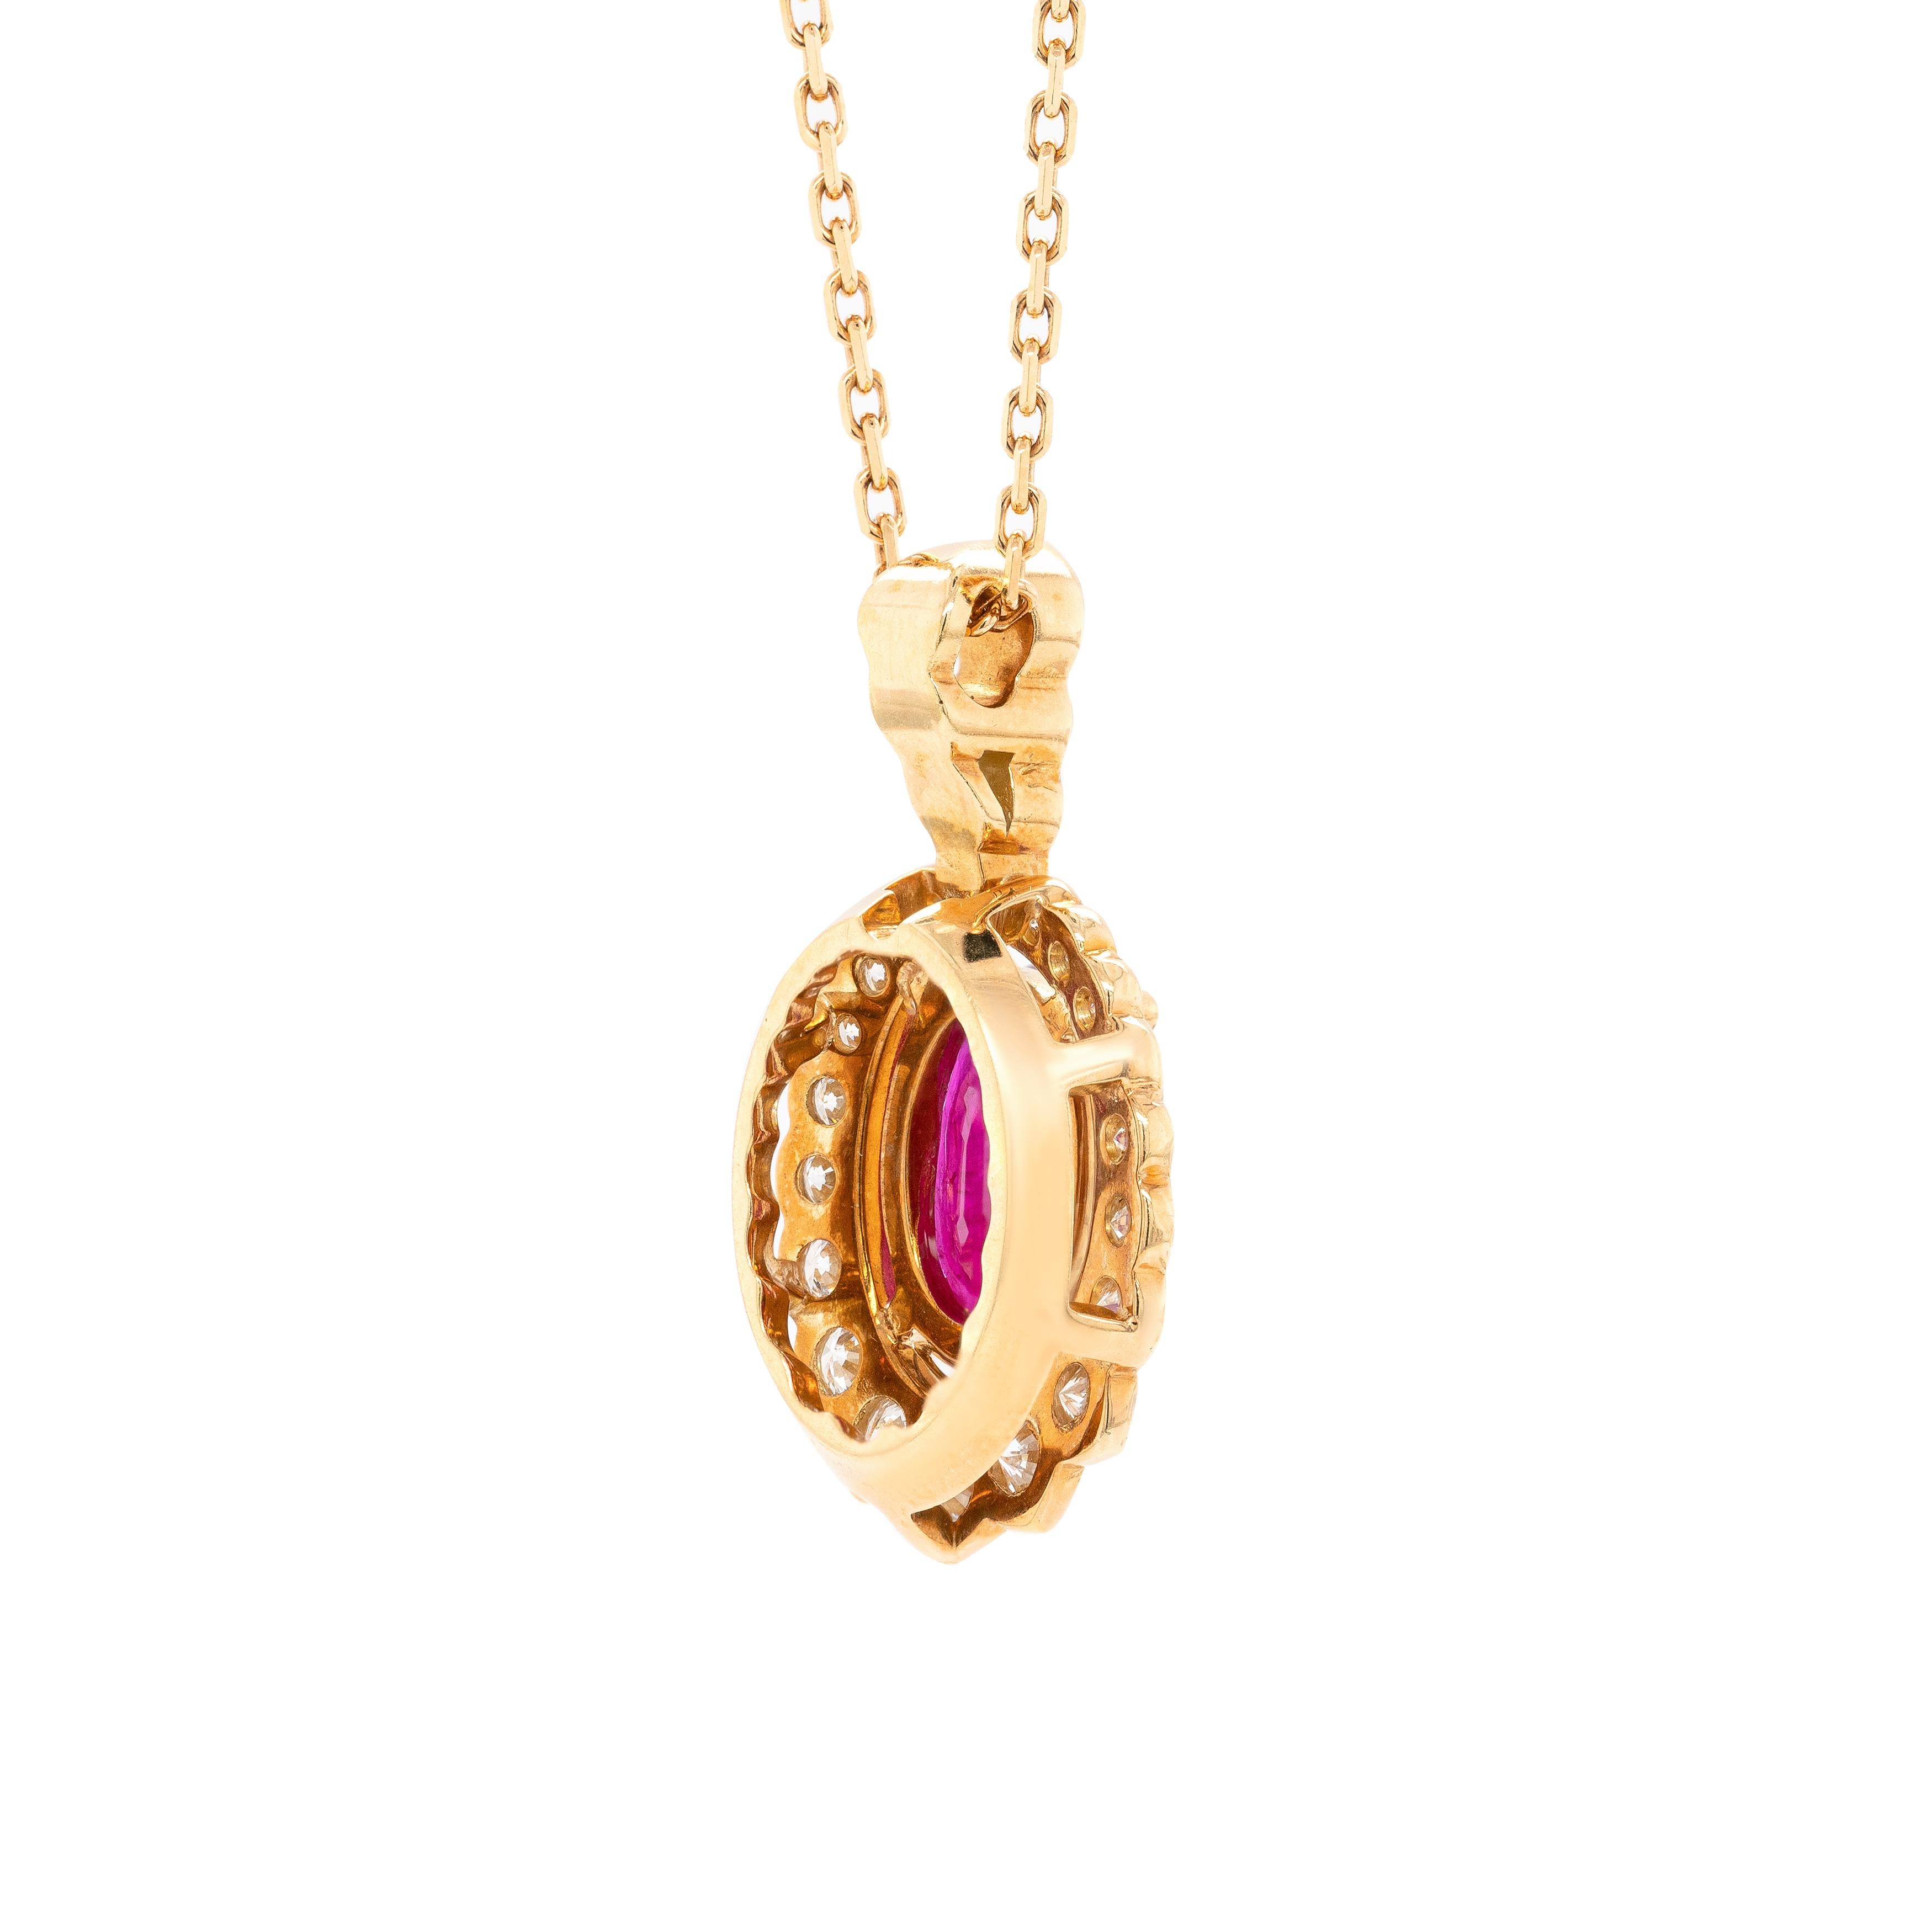 Stunning pendant and chain featuring a beautiful oval shaped ruby weighing 1.55ct in a four claw open-back setting. The ruby is surrounded by 20 fine quality round brilliant cut diamonds graduating from approximately 0.015-0.05ct with 3 additional